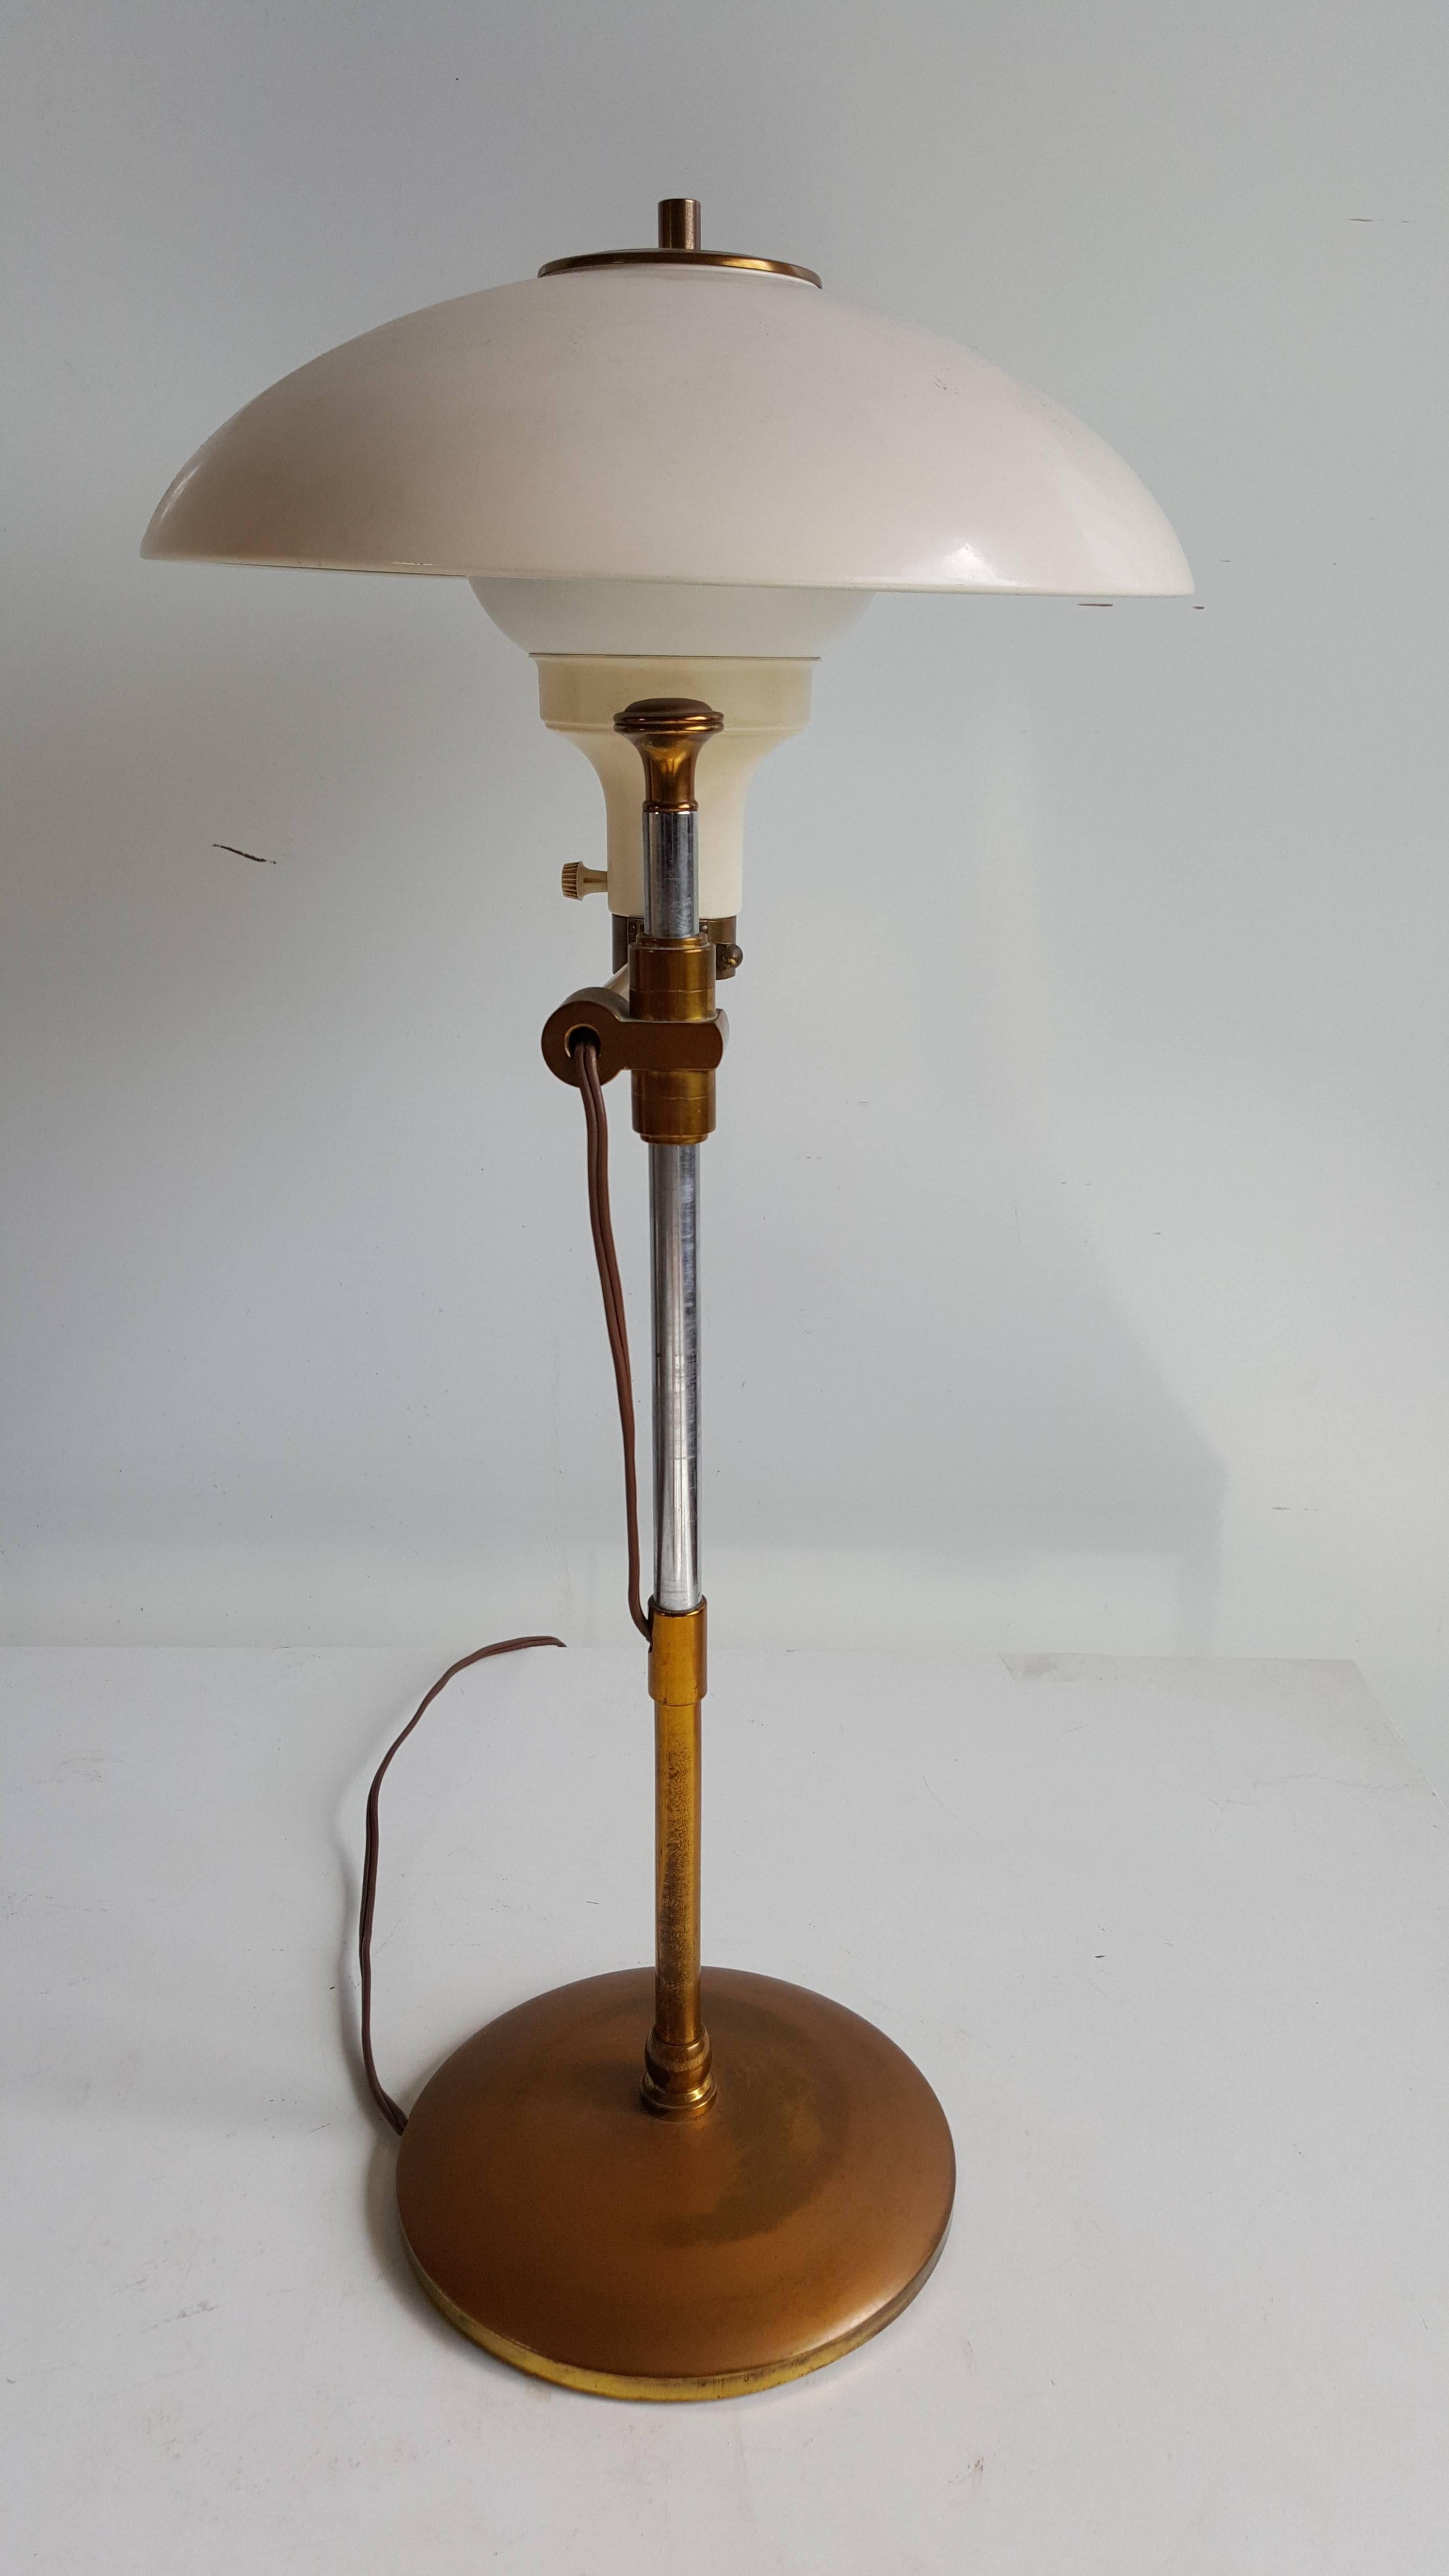 Wonderful desk lamp by Paavo Tynell for Taito, Finland, with large dome crème colored enameled shade, exquisite modernist Bauhaus design, superior quality. Brass detailing, base, finial and fittings.